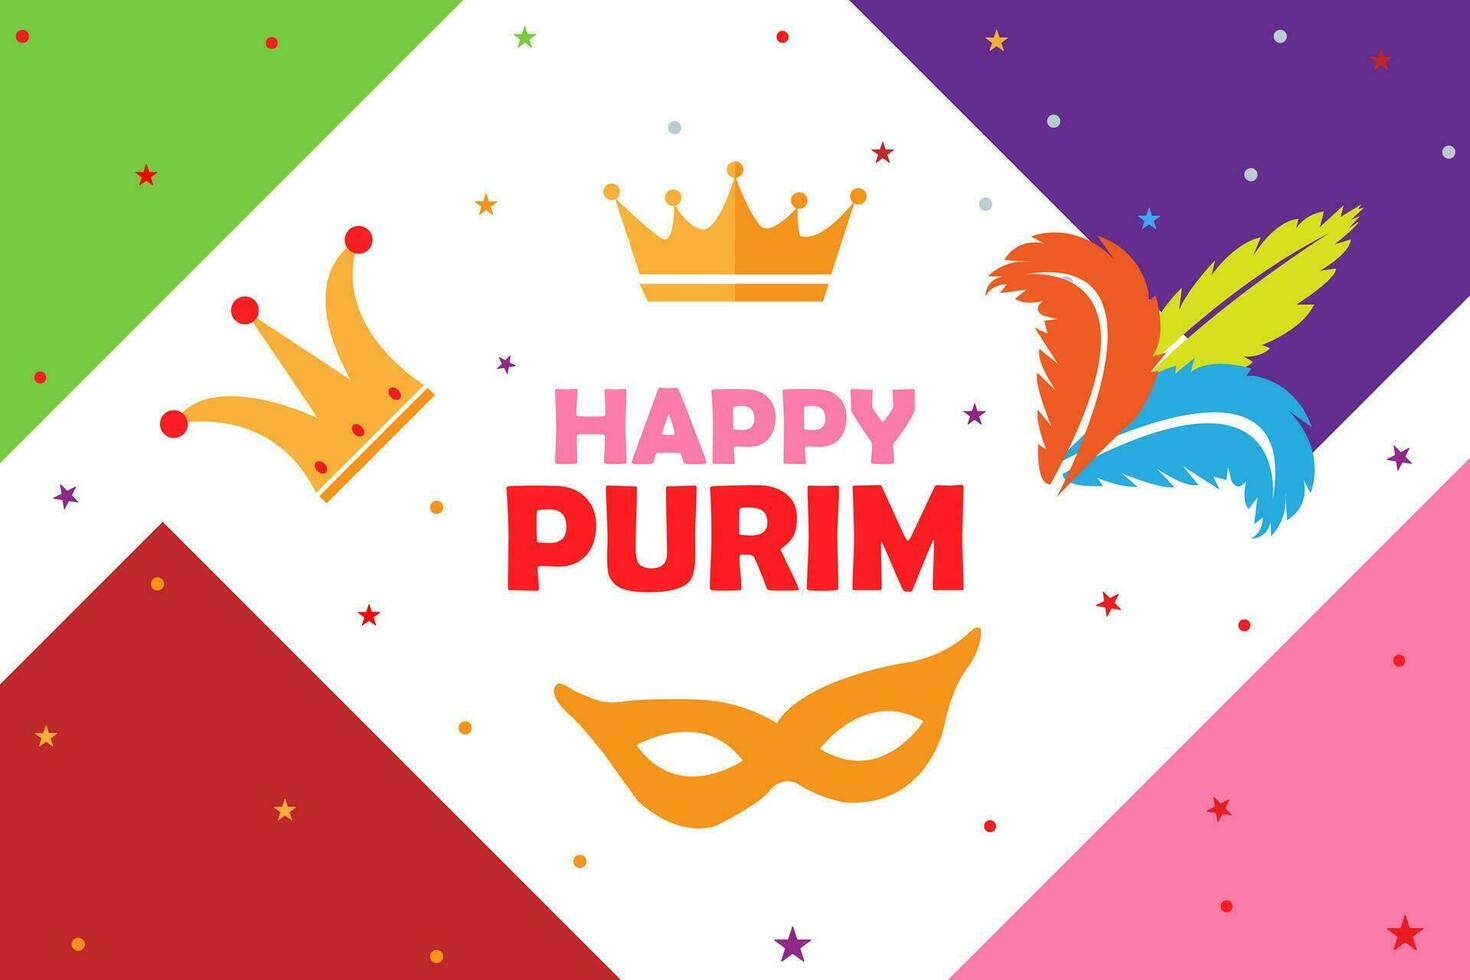 Happy Purim holiday greeting card with traditional purim symbols. Vector illustration. Element for design business cards, invitations, gift cards.